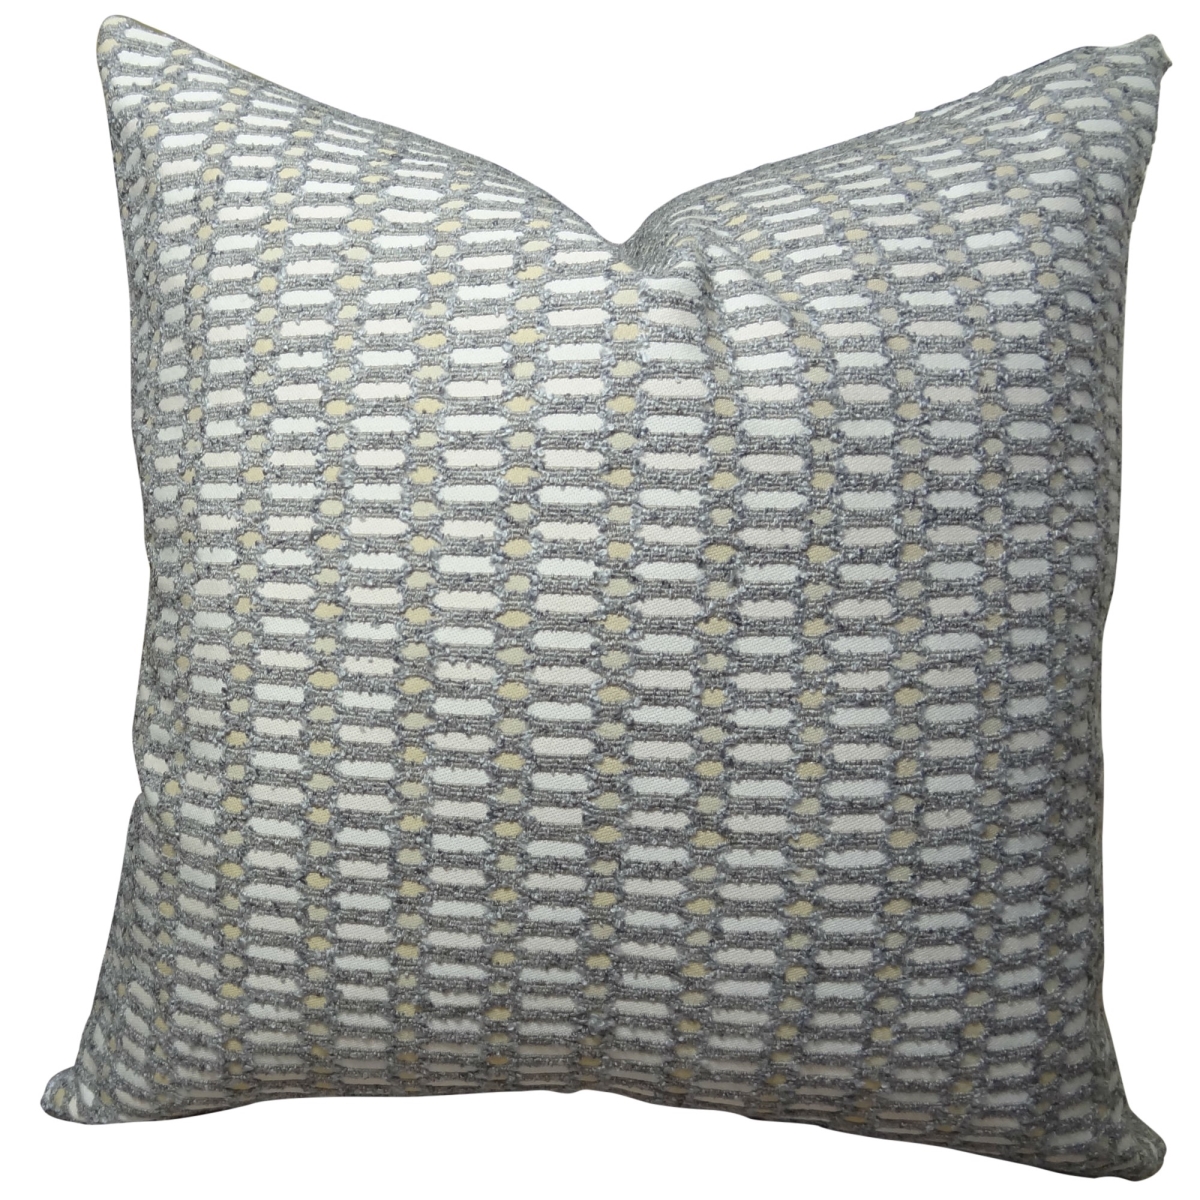 Plutus PB11223-1616-SP Cycle Joiners Handmade Throw Pillow, Gray & Cream - 16 x 16 in.